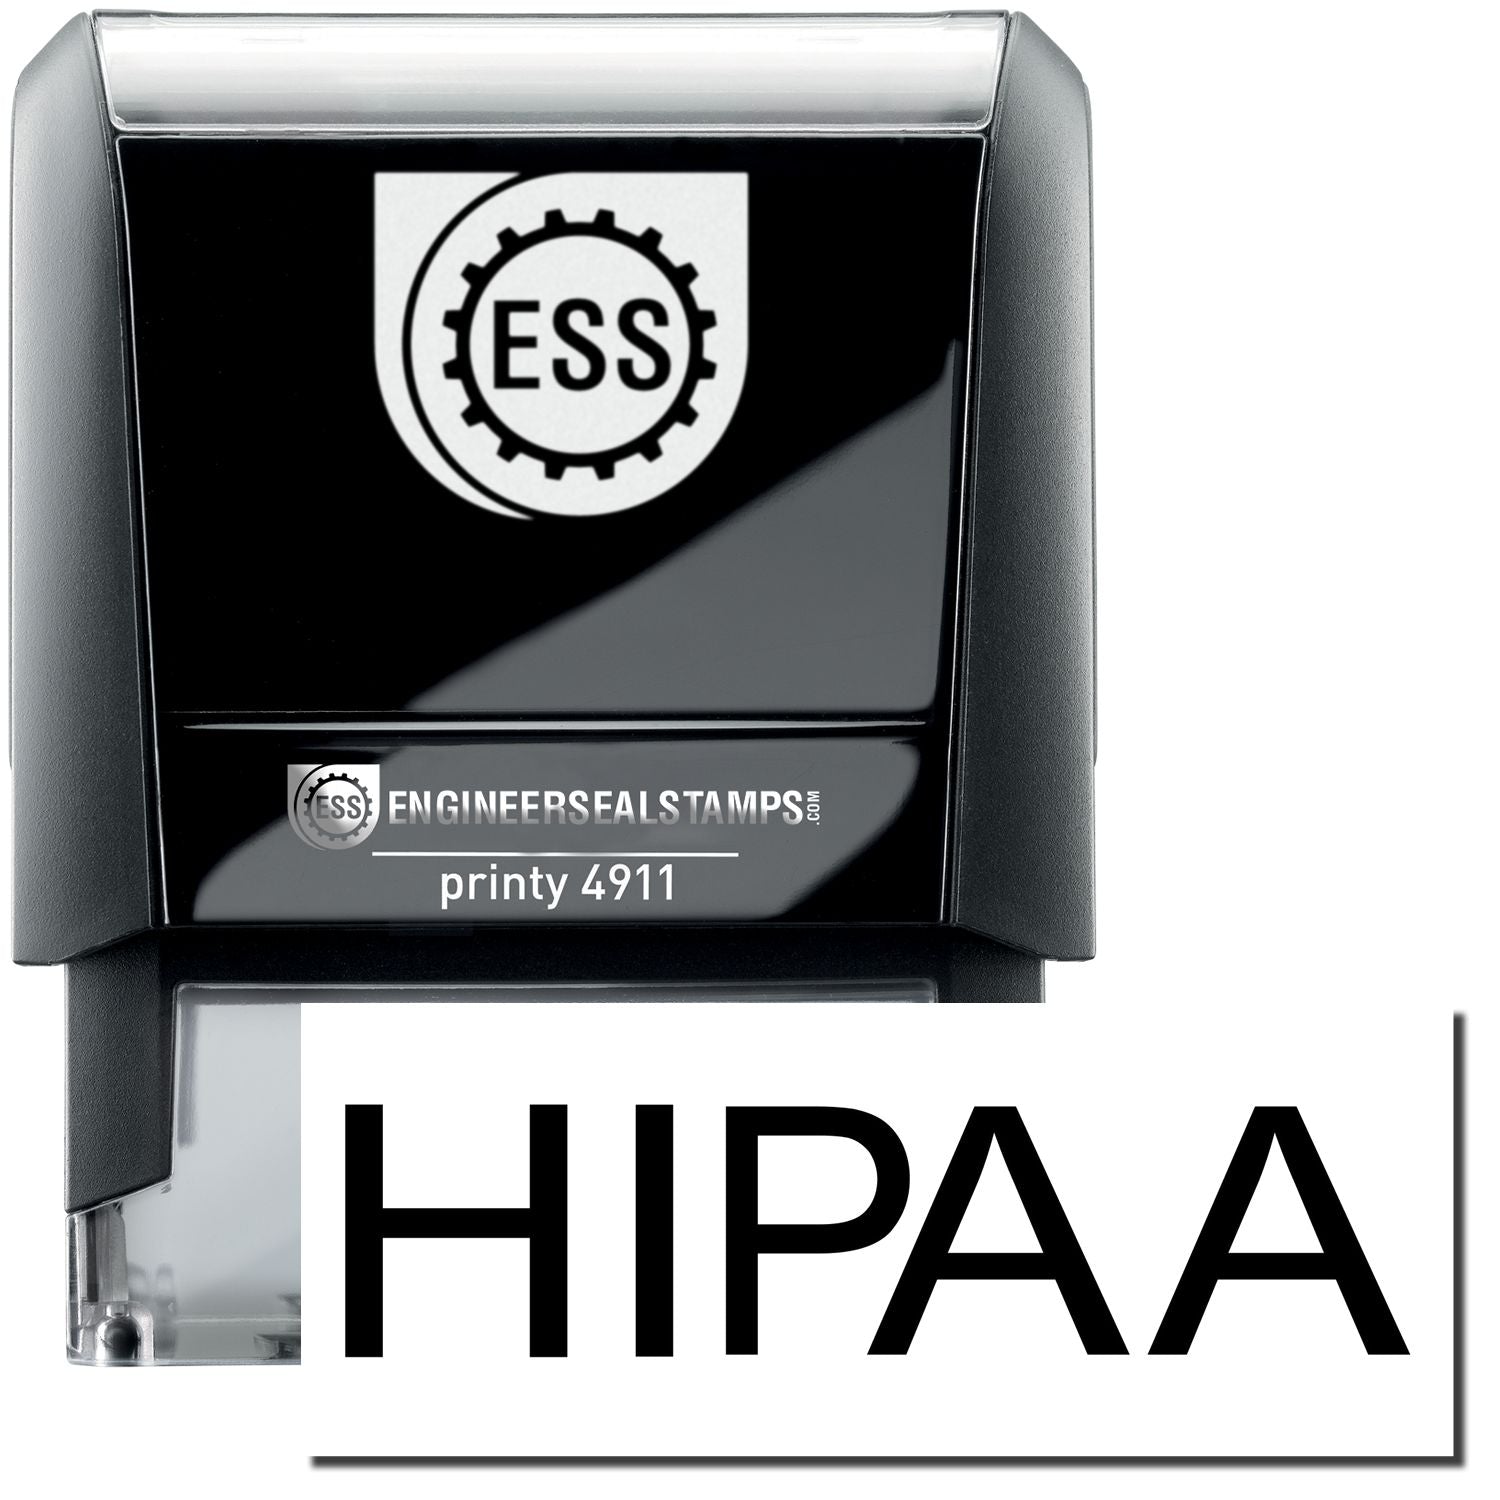 A self-inking stamp with a stamped image showing how the text "HIPAA" is displayed after stamping.